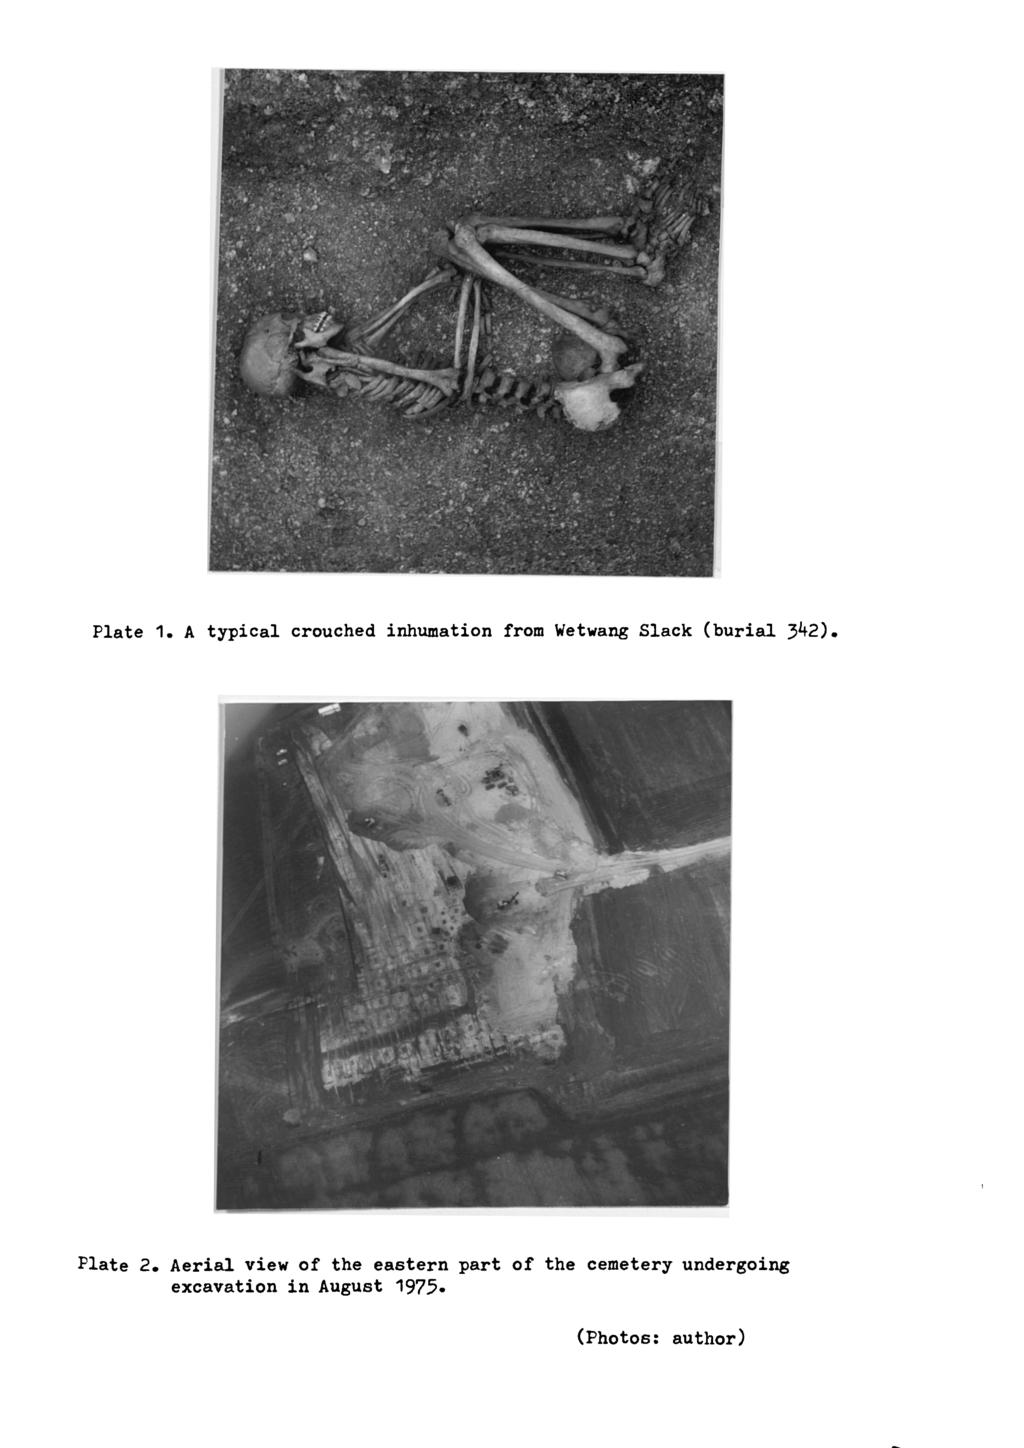 Plate 1. A typical crouched inhumation from Wetwang Slack (burial 342). Plate 2.